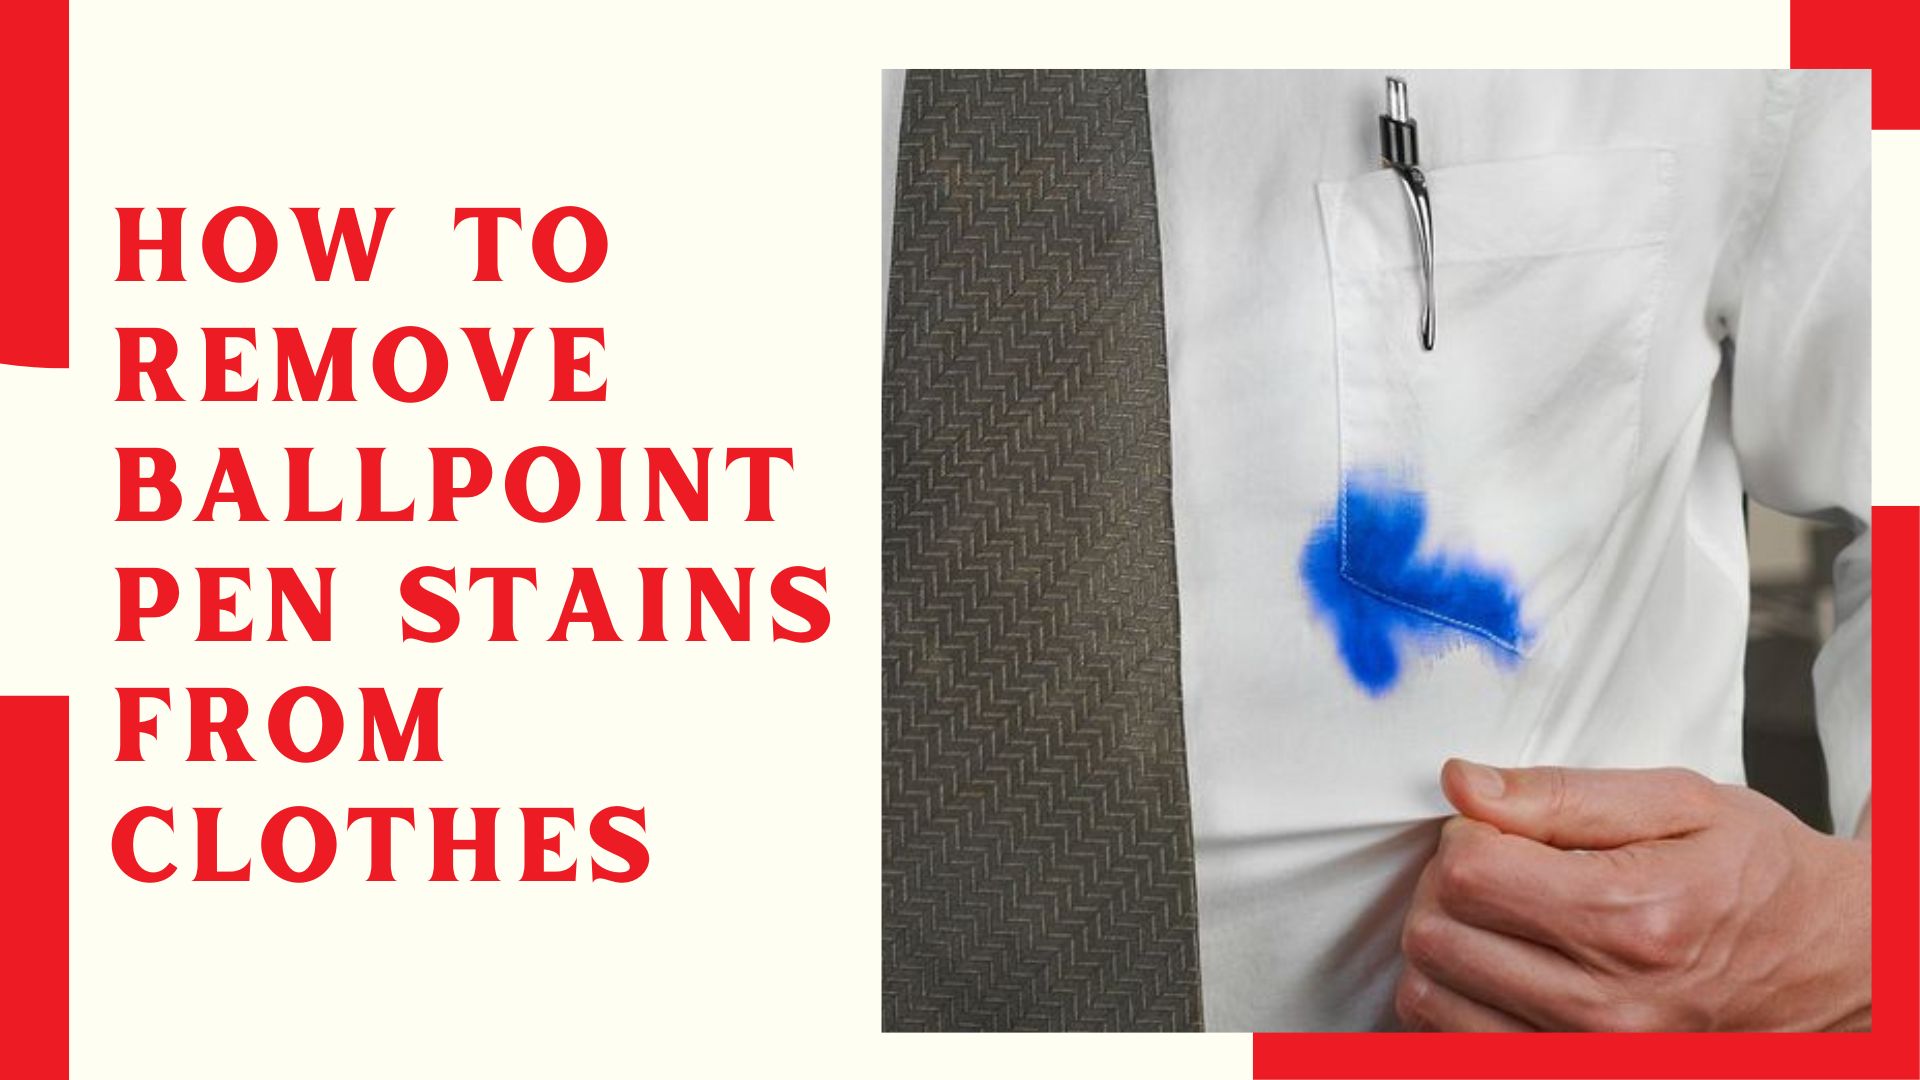 How To Remove Ballpoint Pen Stains From Clothes